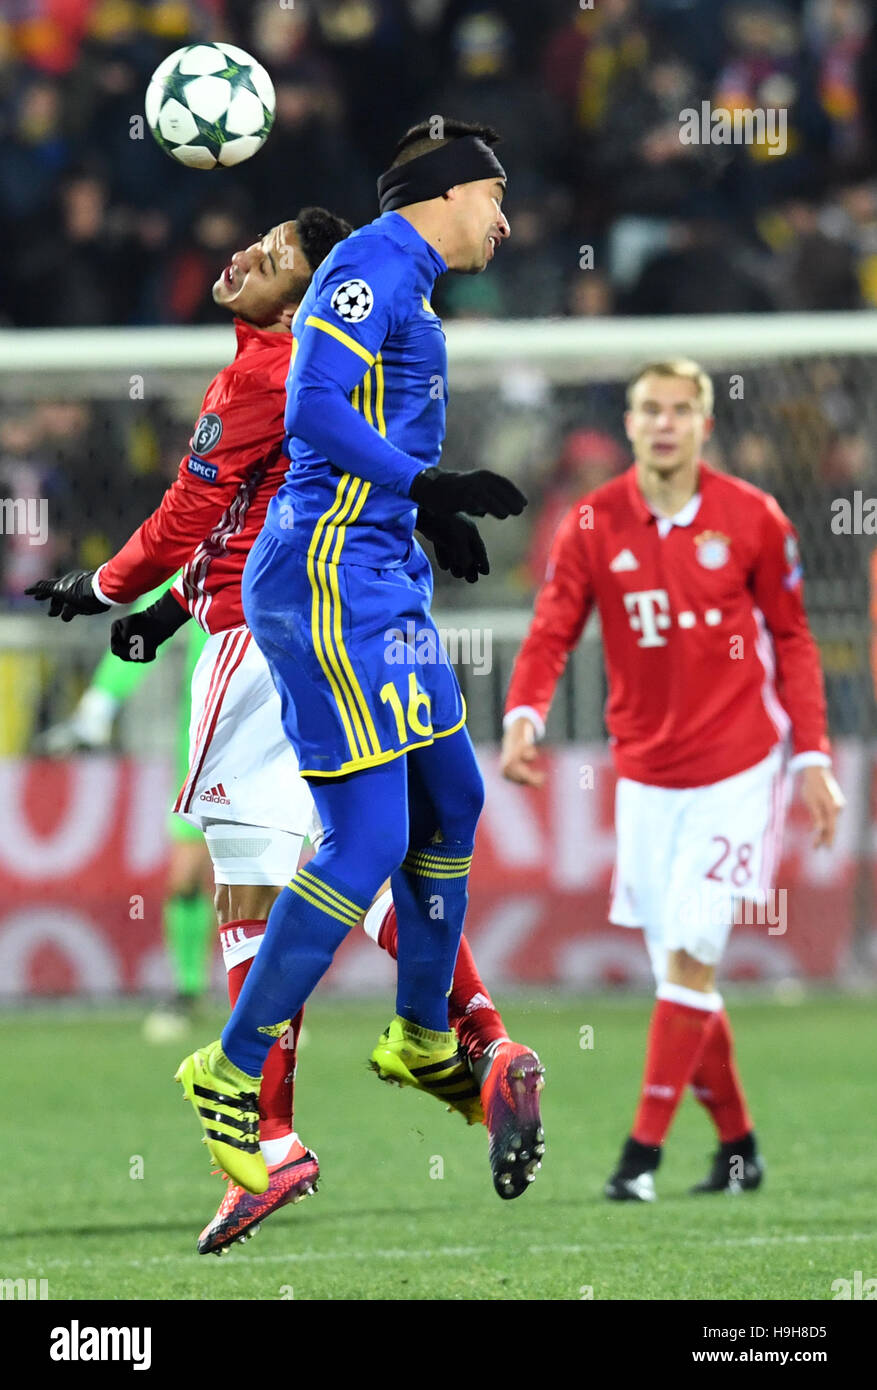 Rostov-on-Don, Russia. 23rd Nov, 2016. Thiago Alcantara (L) from FC Bayern Munich and Christian Noboa from FC Rostov vie for the ball during the Champions League soccer match between FC Rostov and FC Bayern Munich in the Olimp-2 Stadium in Rostov-on-Don, Russia, 23 November 2016. Photo: Peter Kneffel/dpa/Alamy Live News Stock Photo